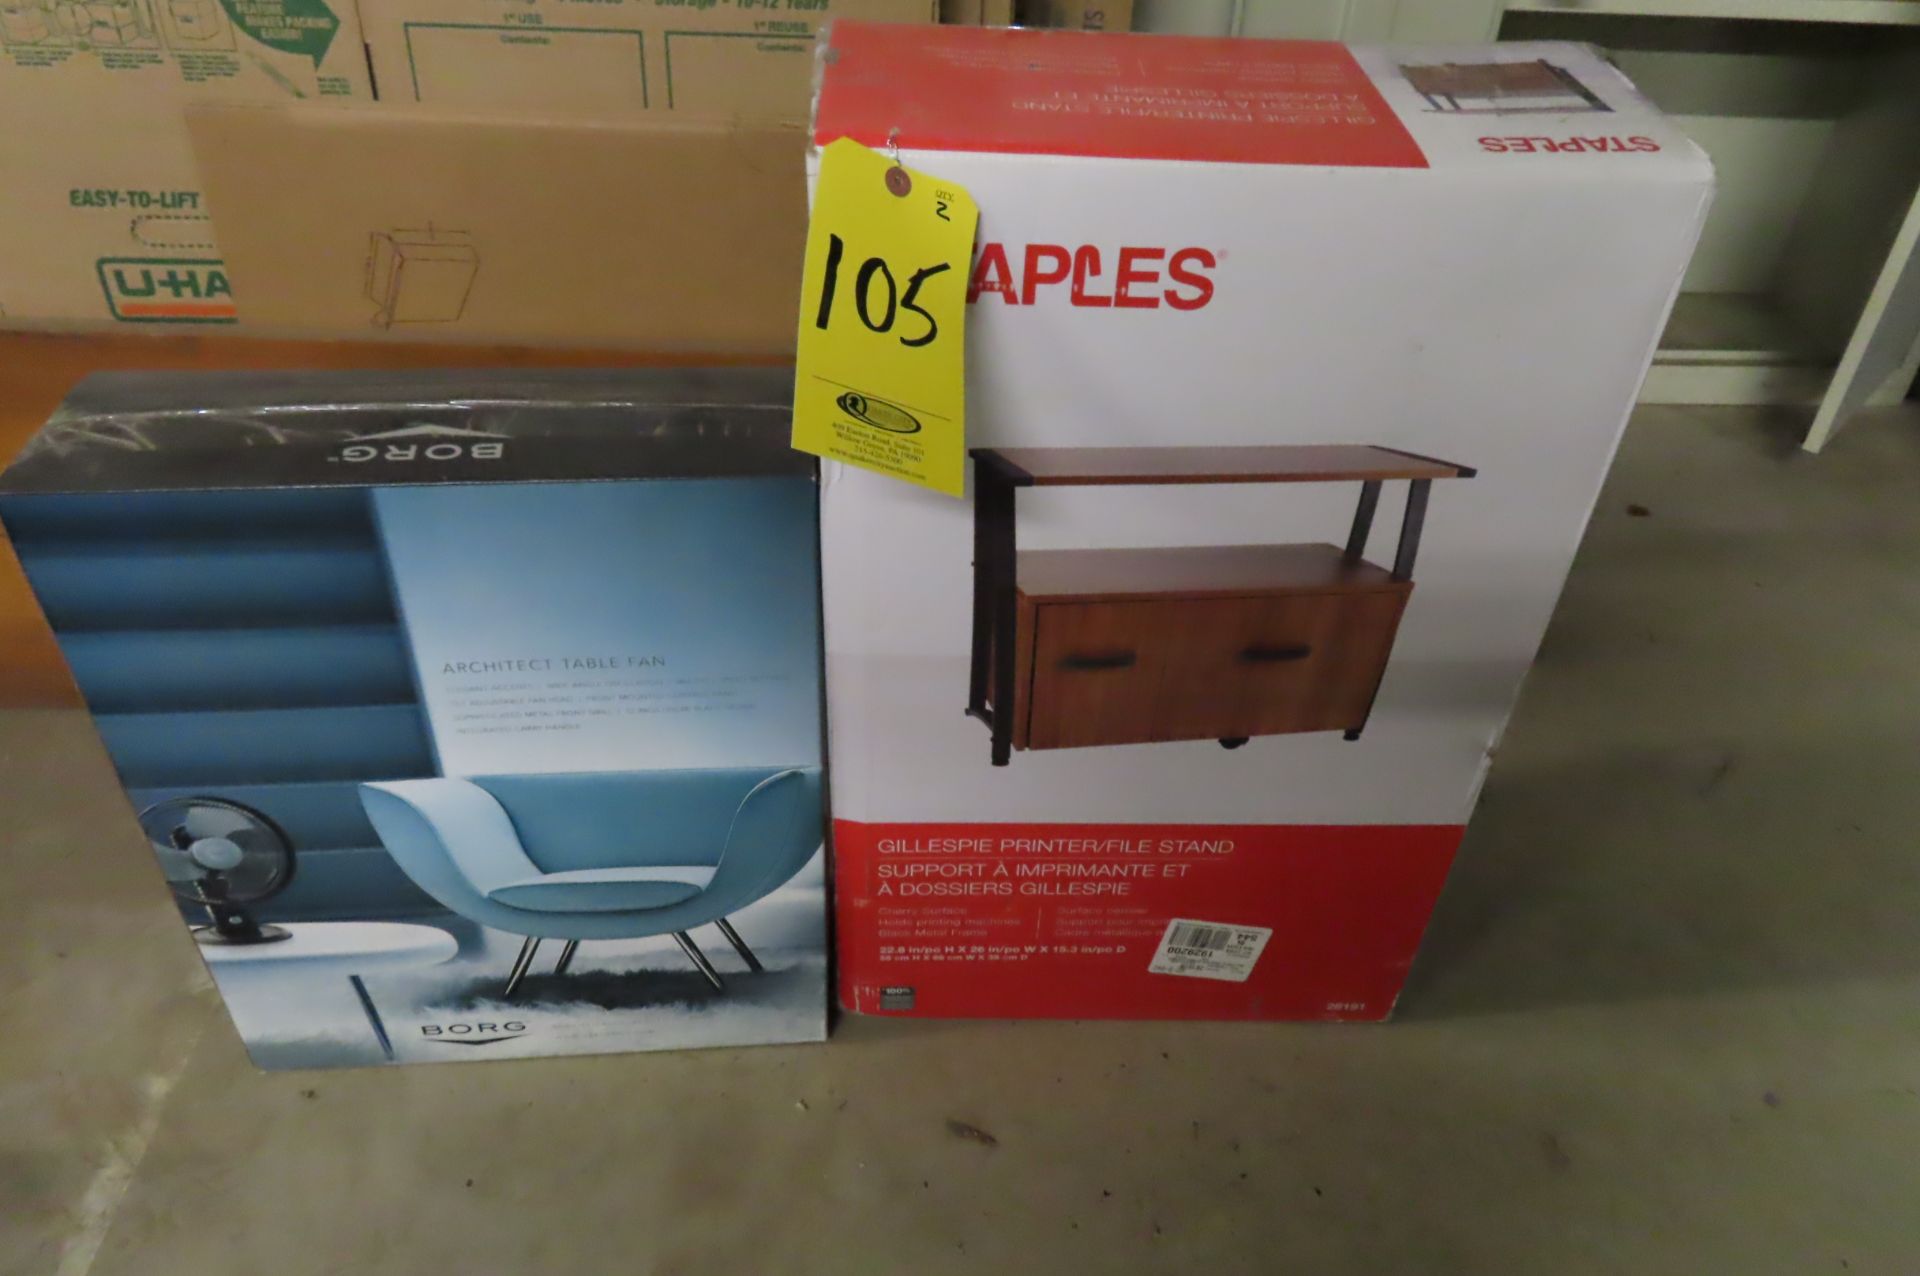 BORG TABLE FAN AND STAPLES PRINTER STAND (BOTH NEW)